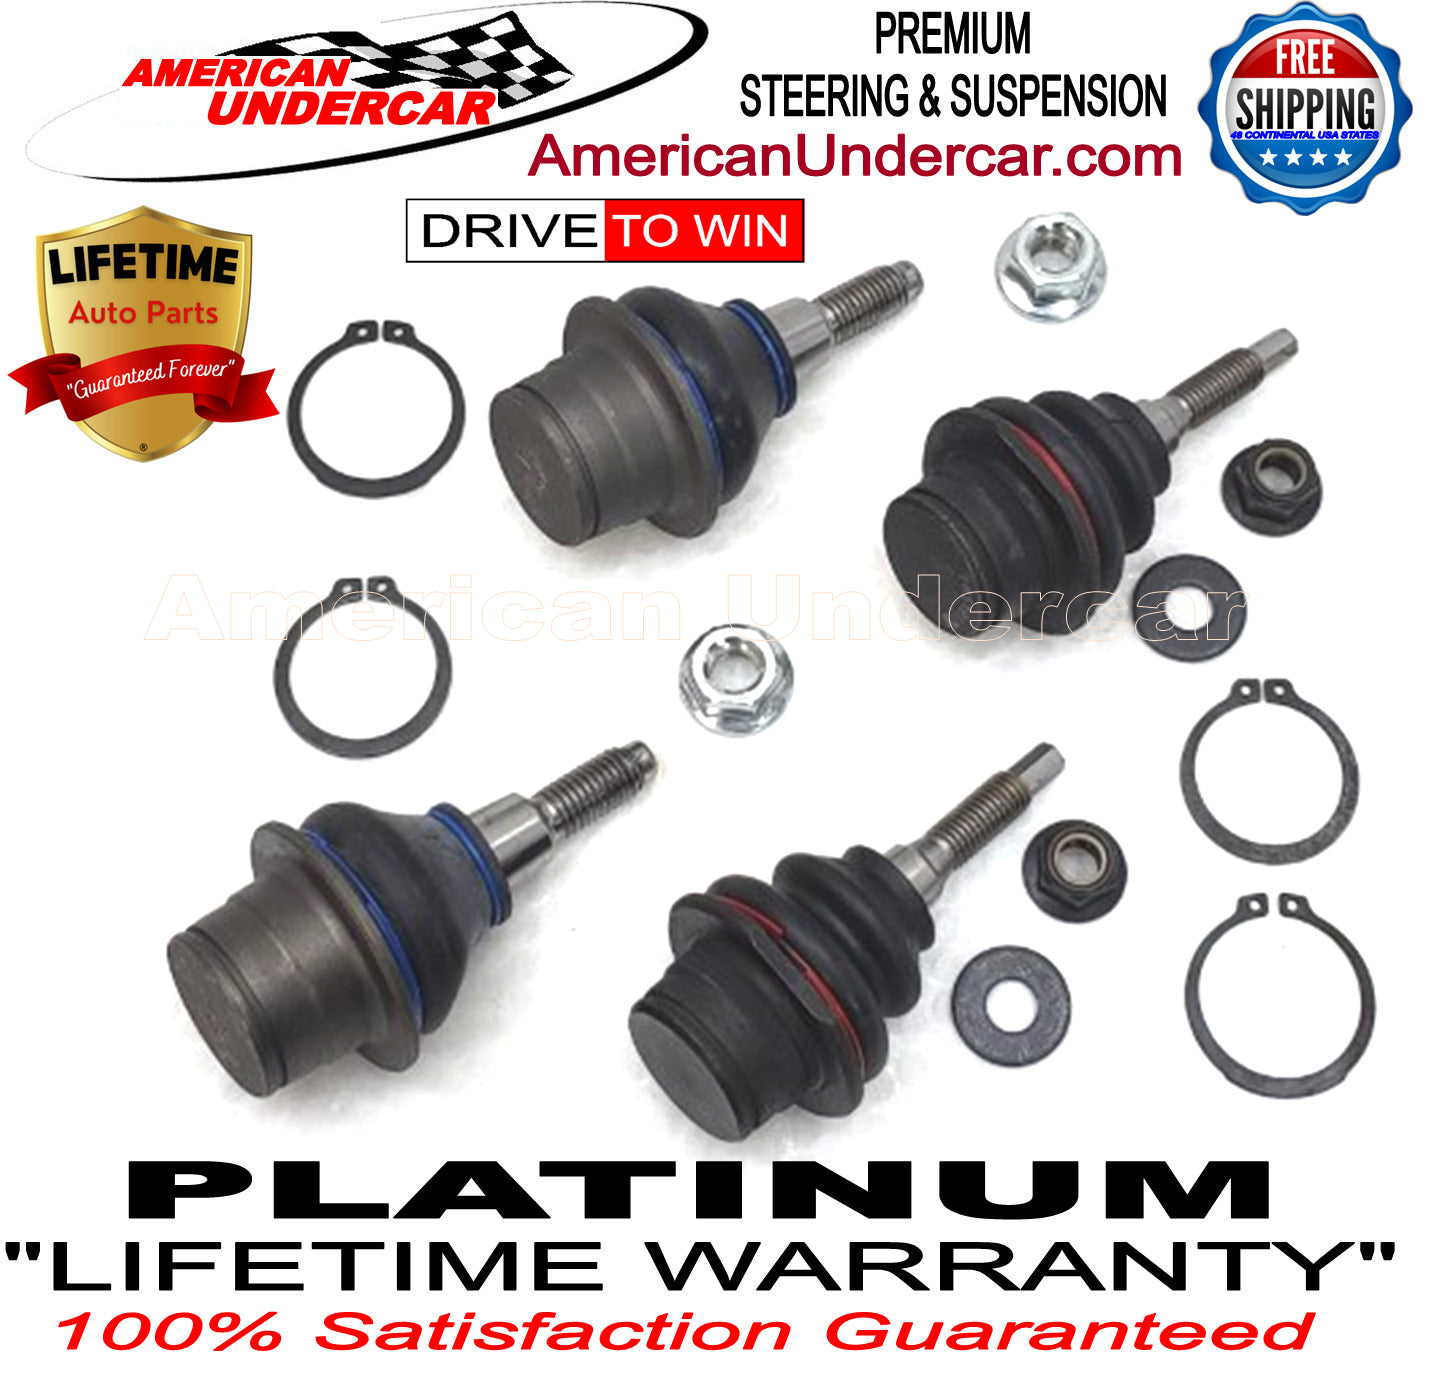 Lifetime Ball Joints Upper and Lower Suspension Kit for 2015-2020 Ford F150 4x4